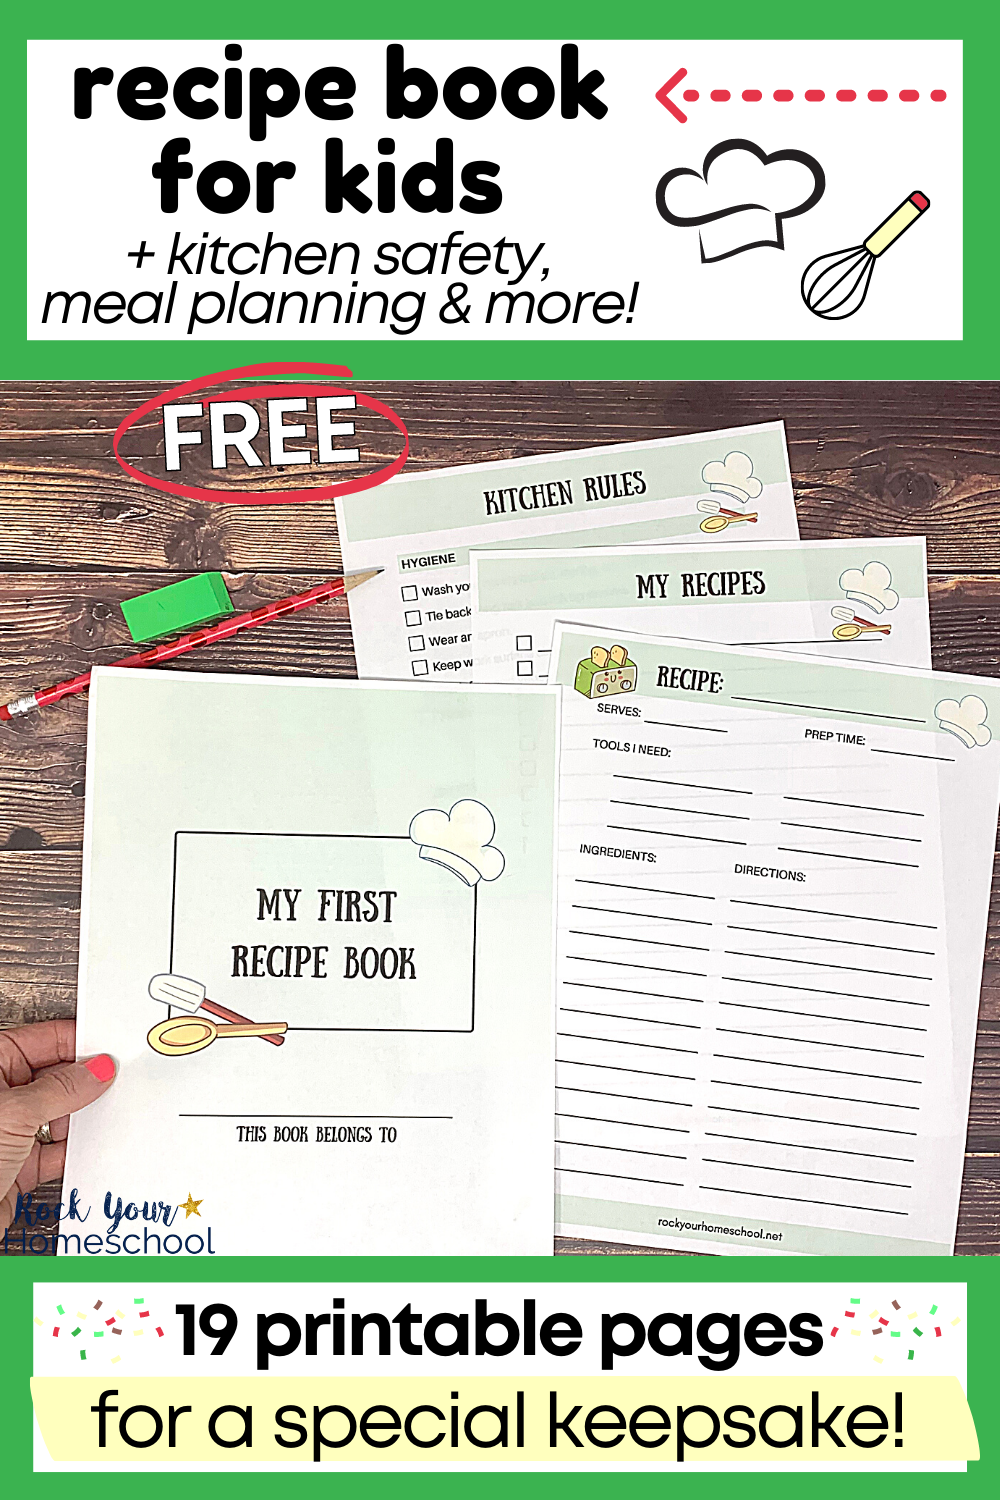 Free Printable Recipe Book for Kids for Creative Learning Fun